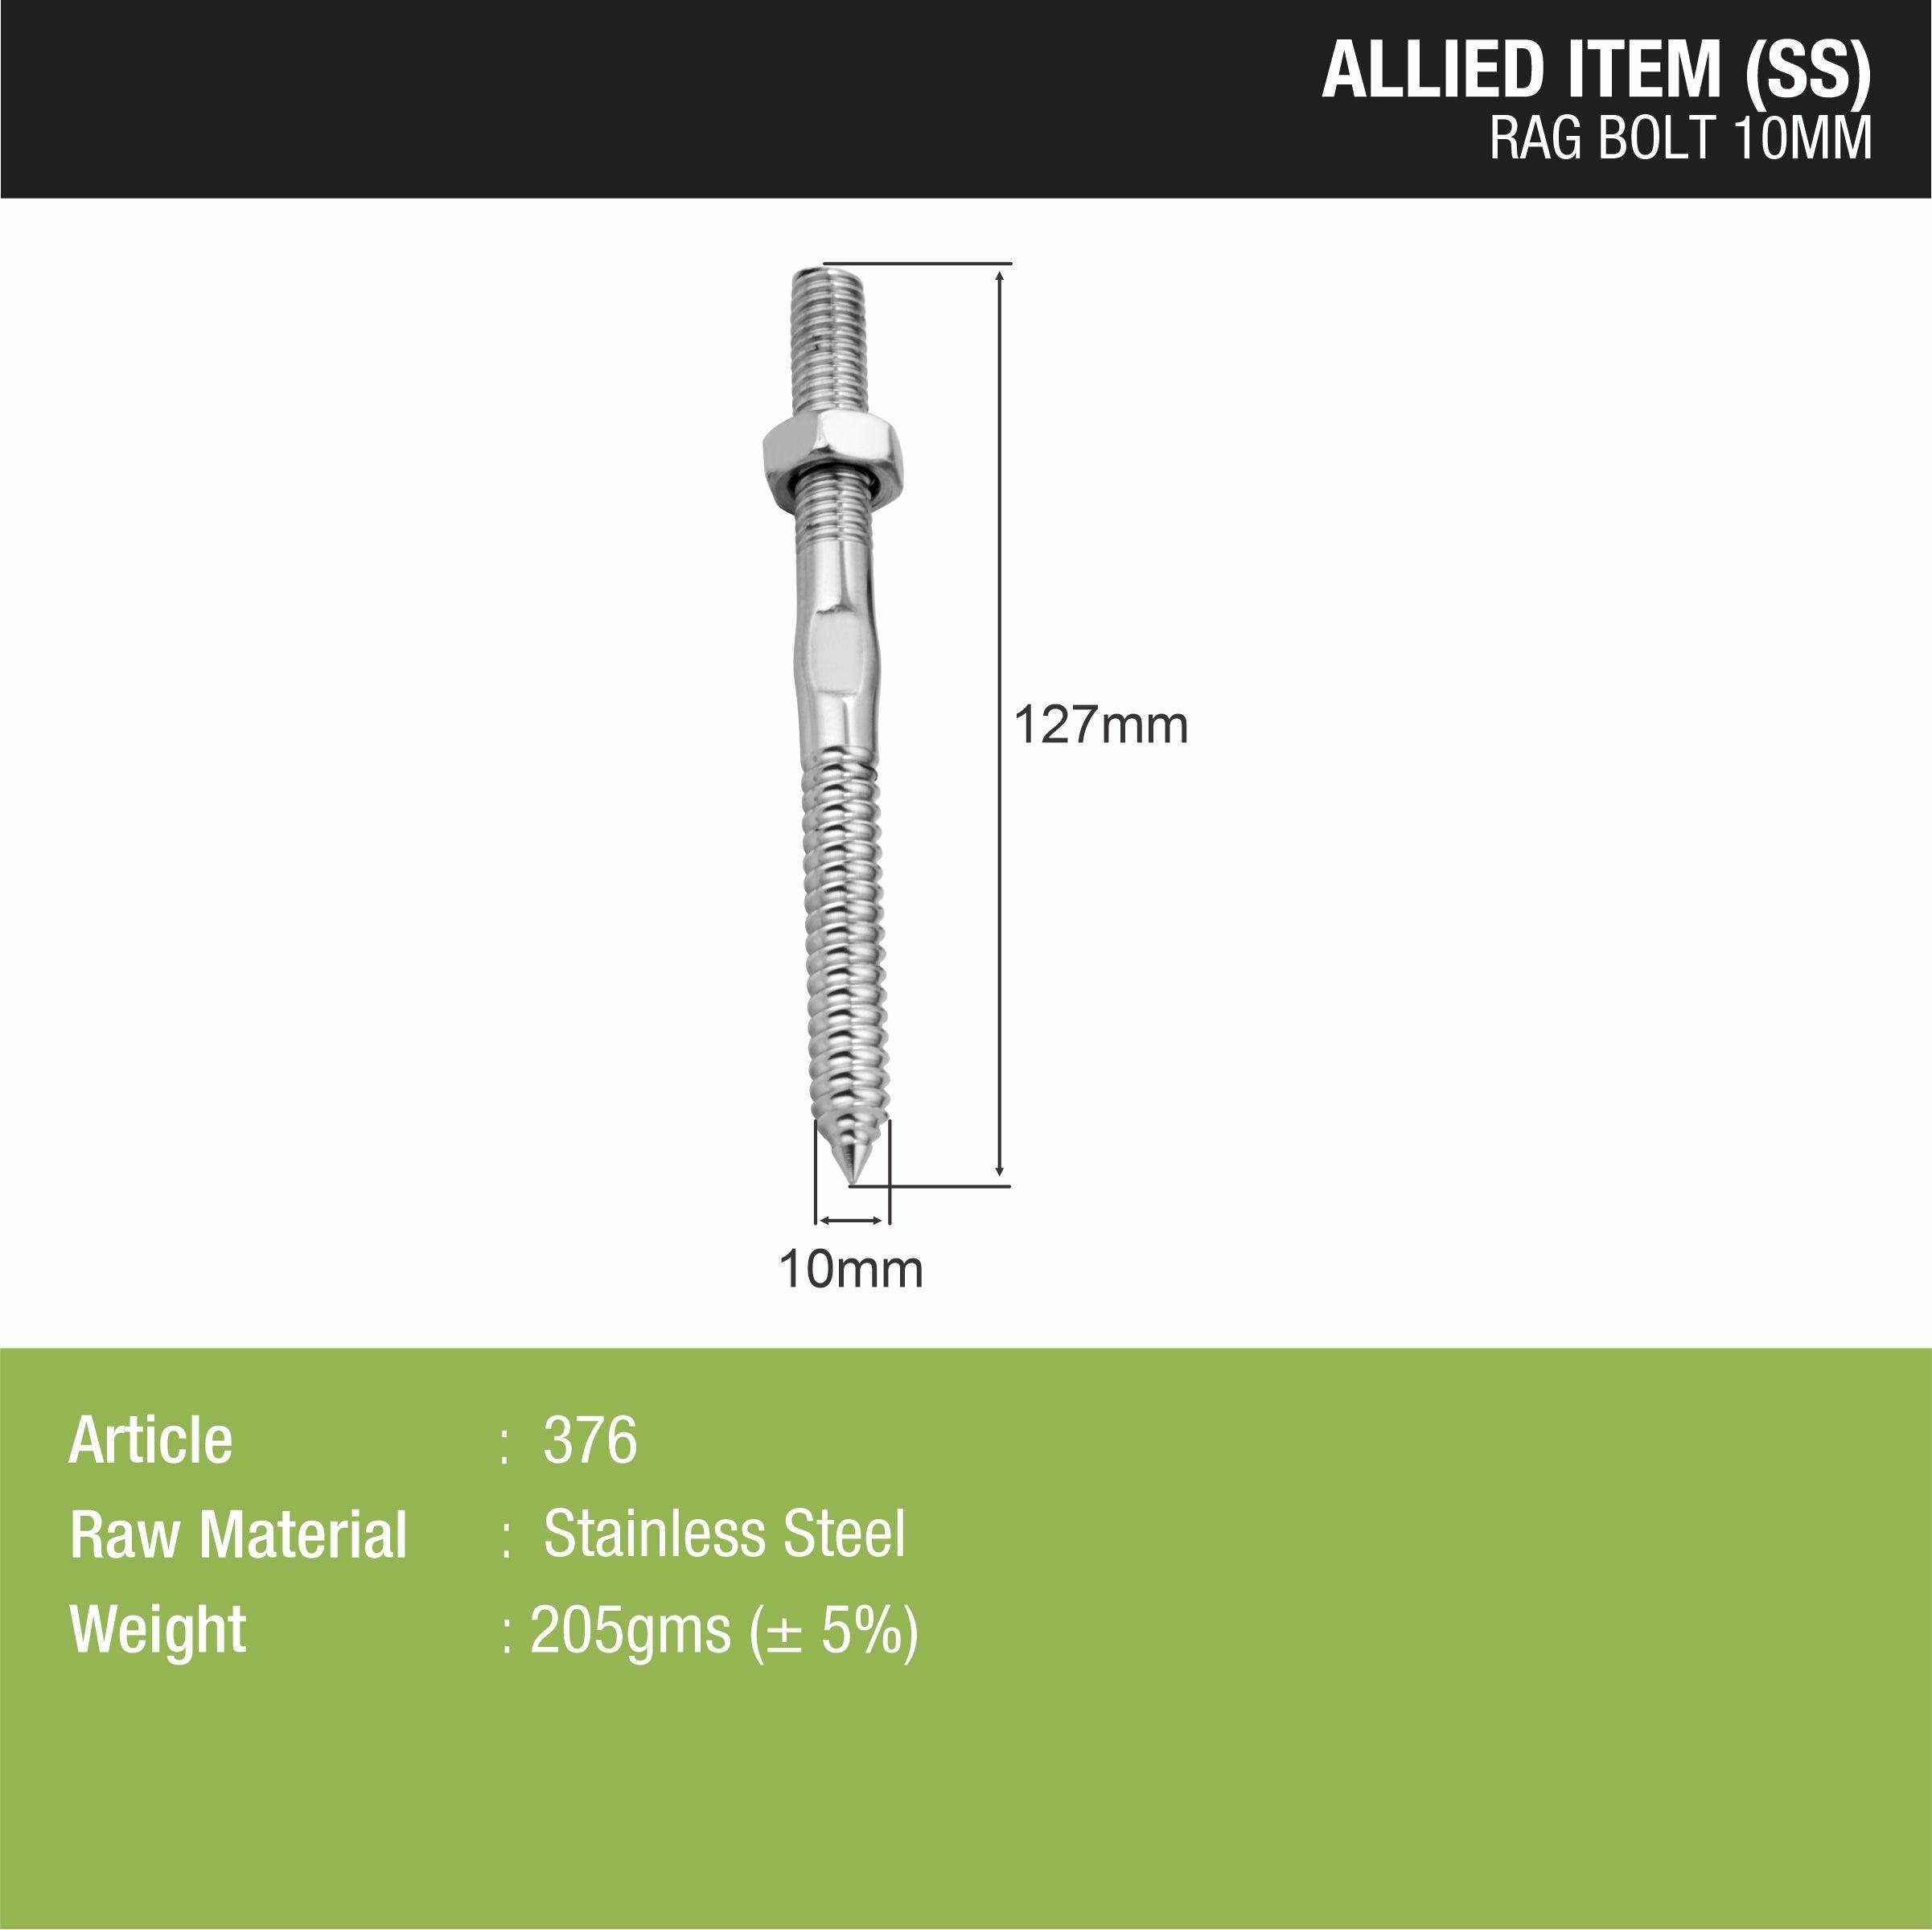 Rag Bolt Stainless Steel (10mm) sizes and dimensions